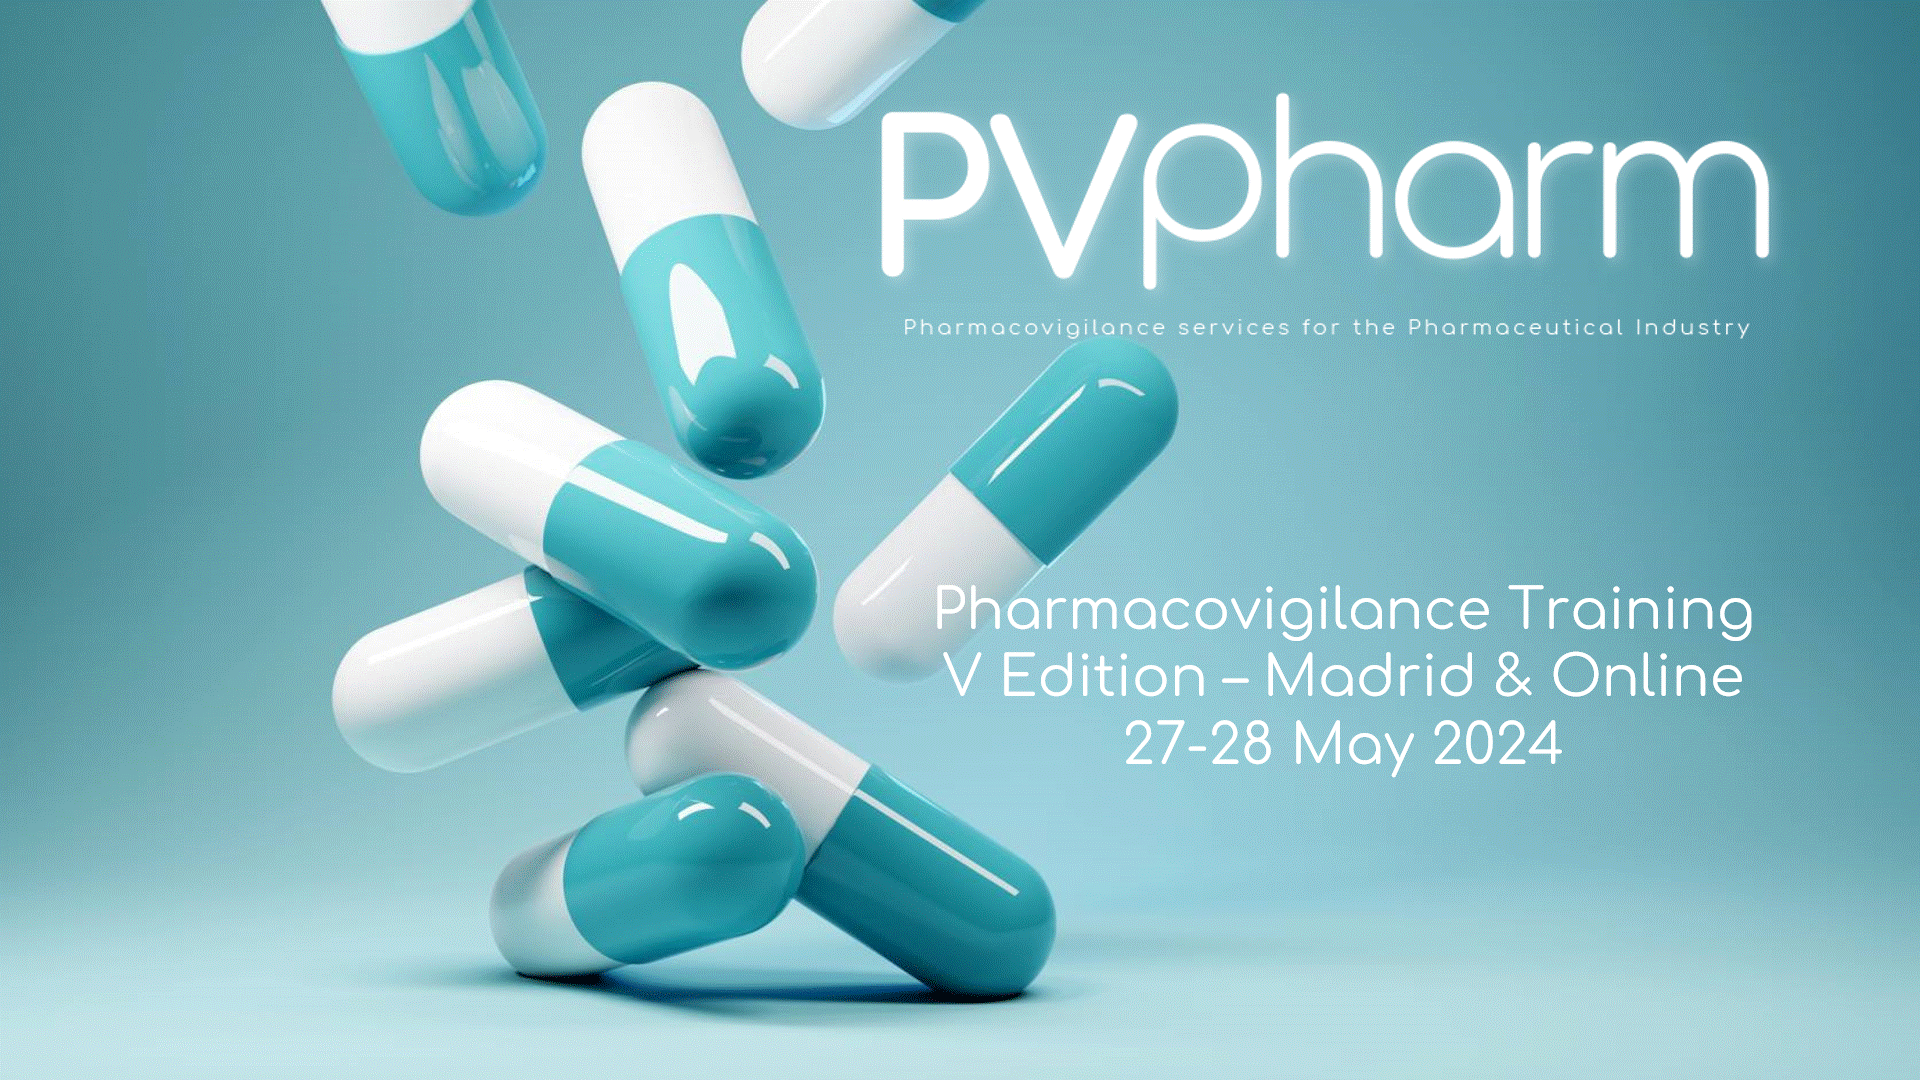 You are currently viewing Pharmacovigilance training V edition, Madrid & Online 27-28 May 2024